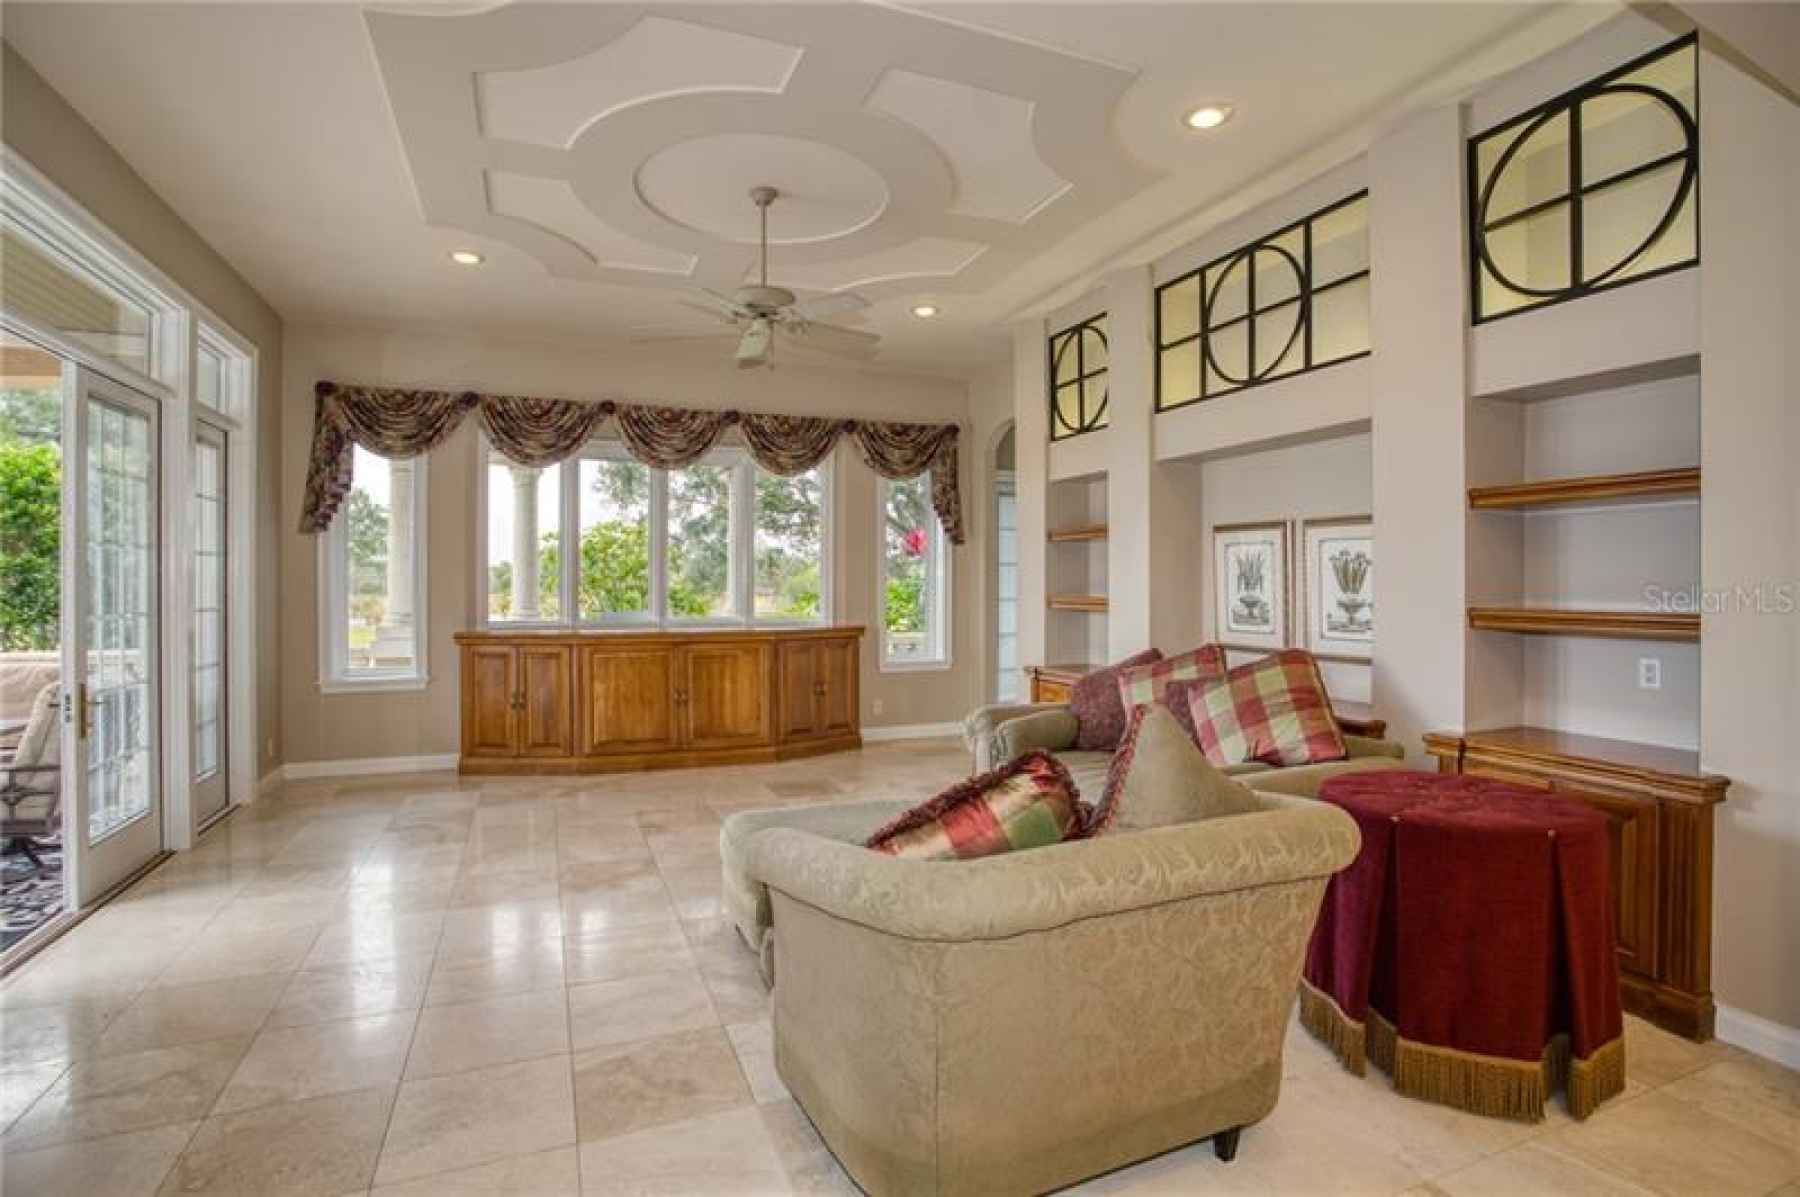 Great Room/Family Room with detailed ceiling